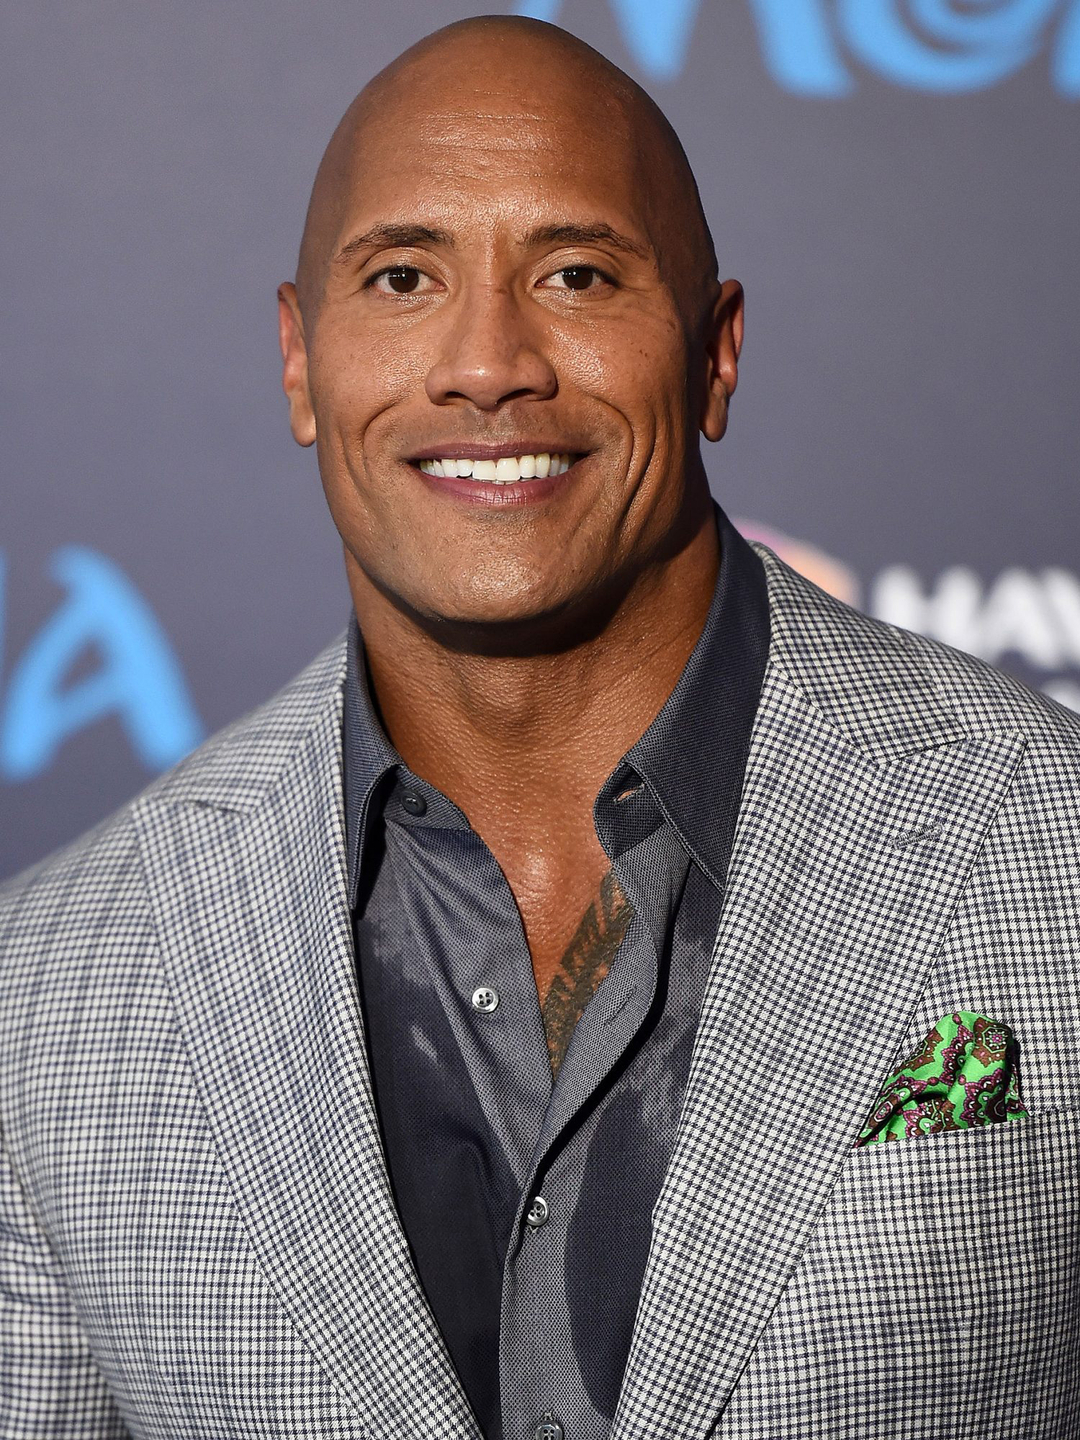 Dwayne Johnson how did he became famous